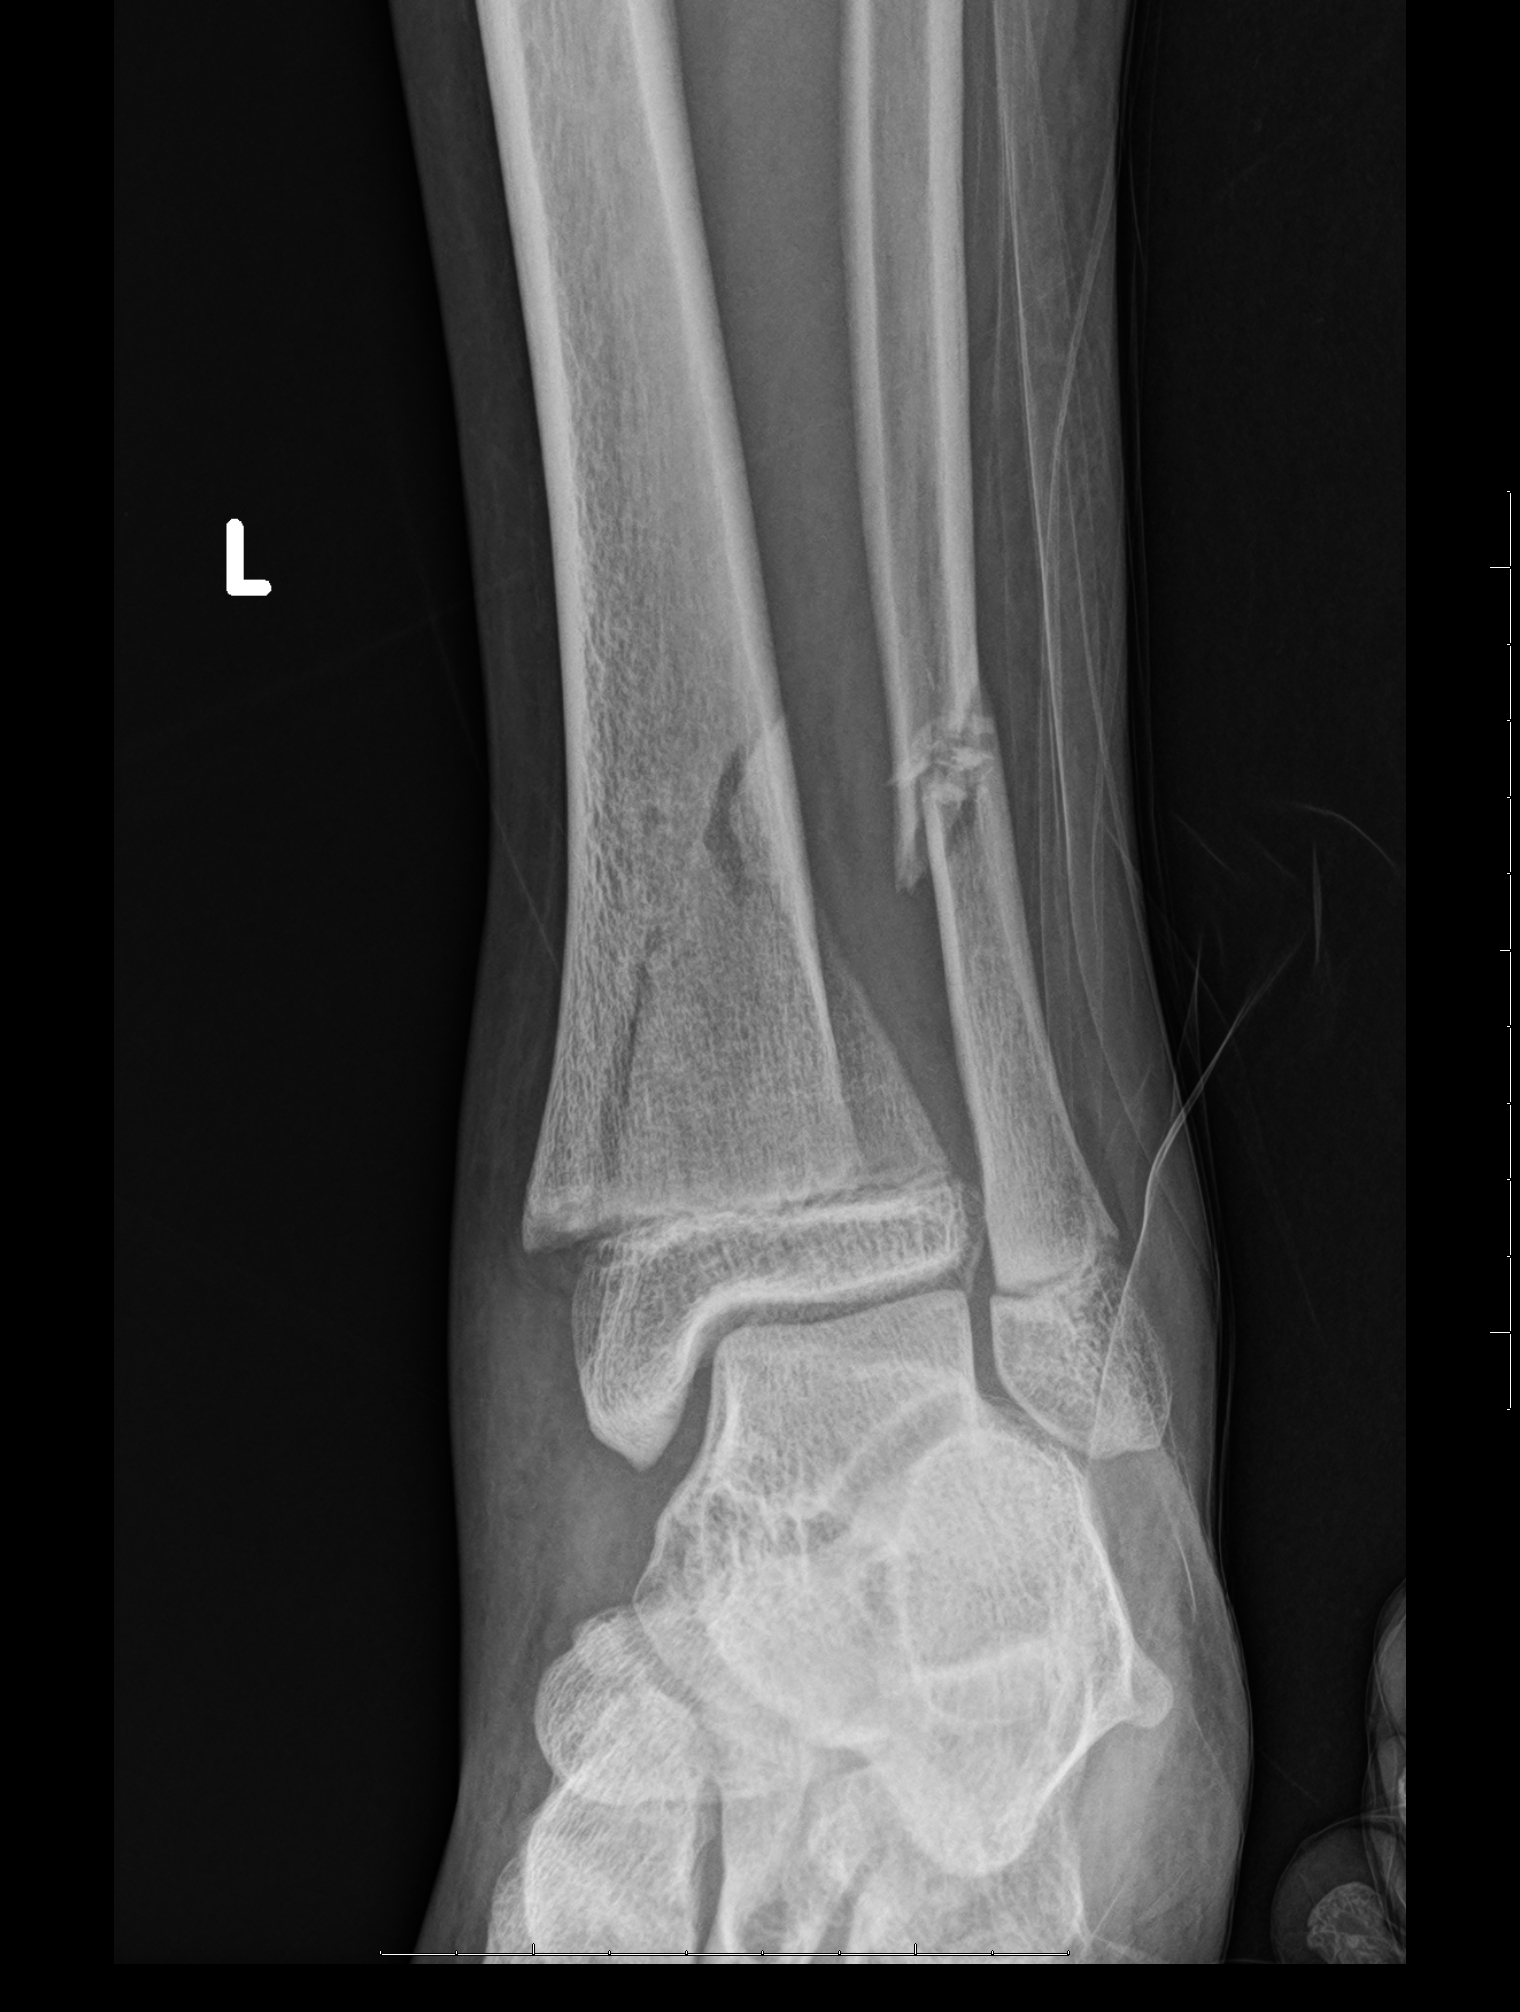 Oblique view of the ankle demonstrating a fracture through the physes and the metaphyses consistent with a Salter-Harris type 2 fracture